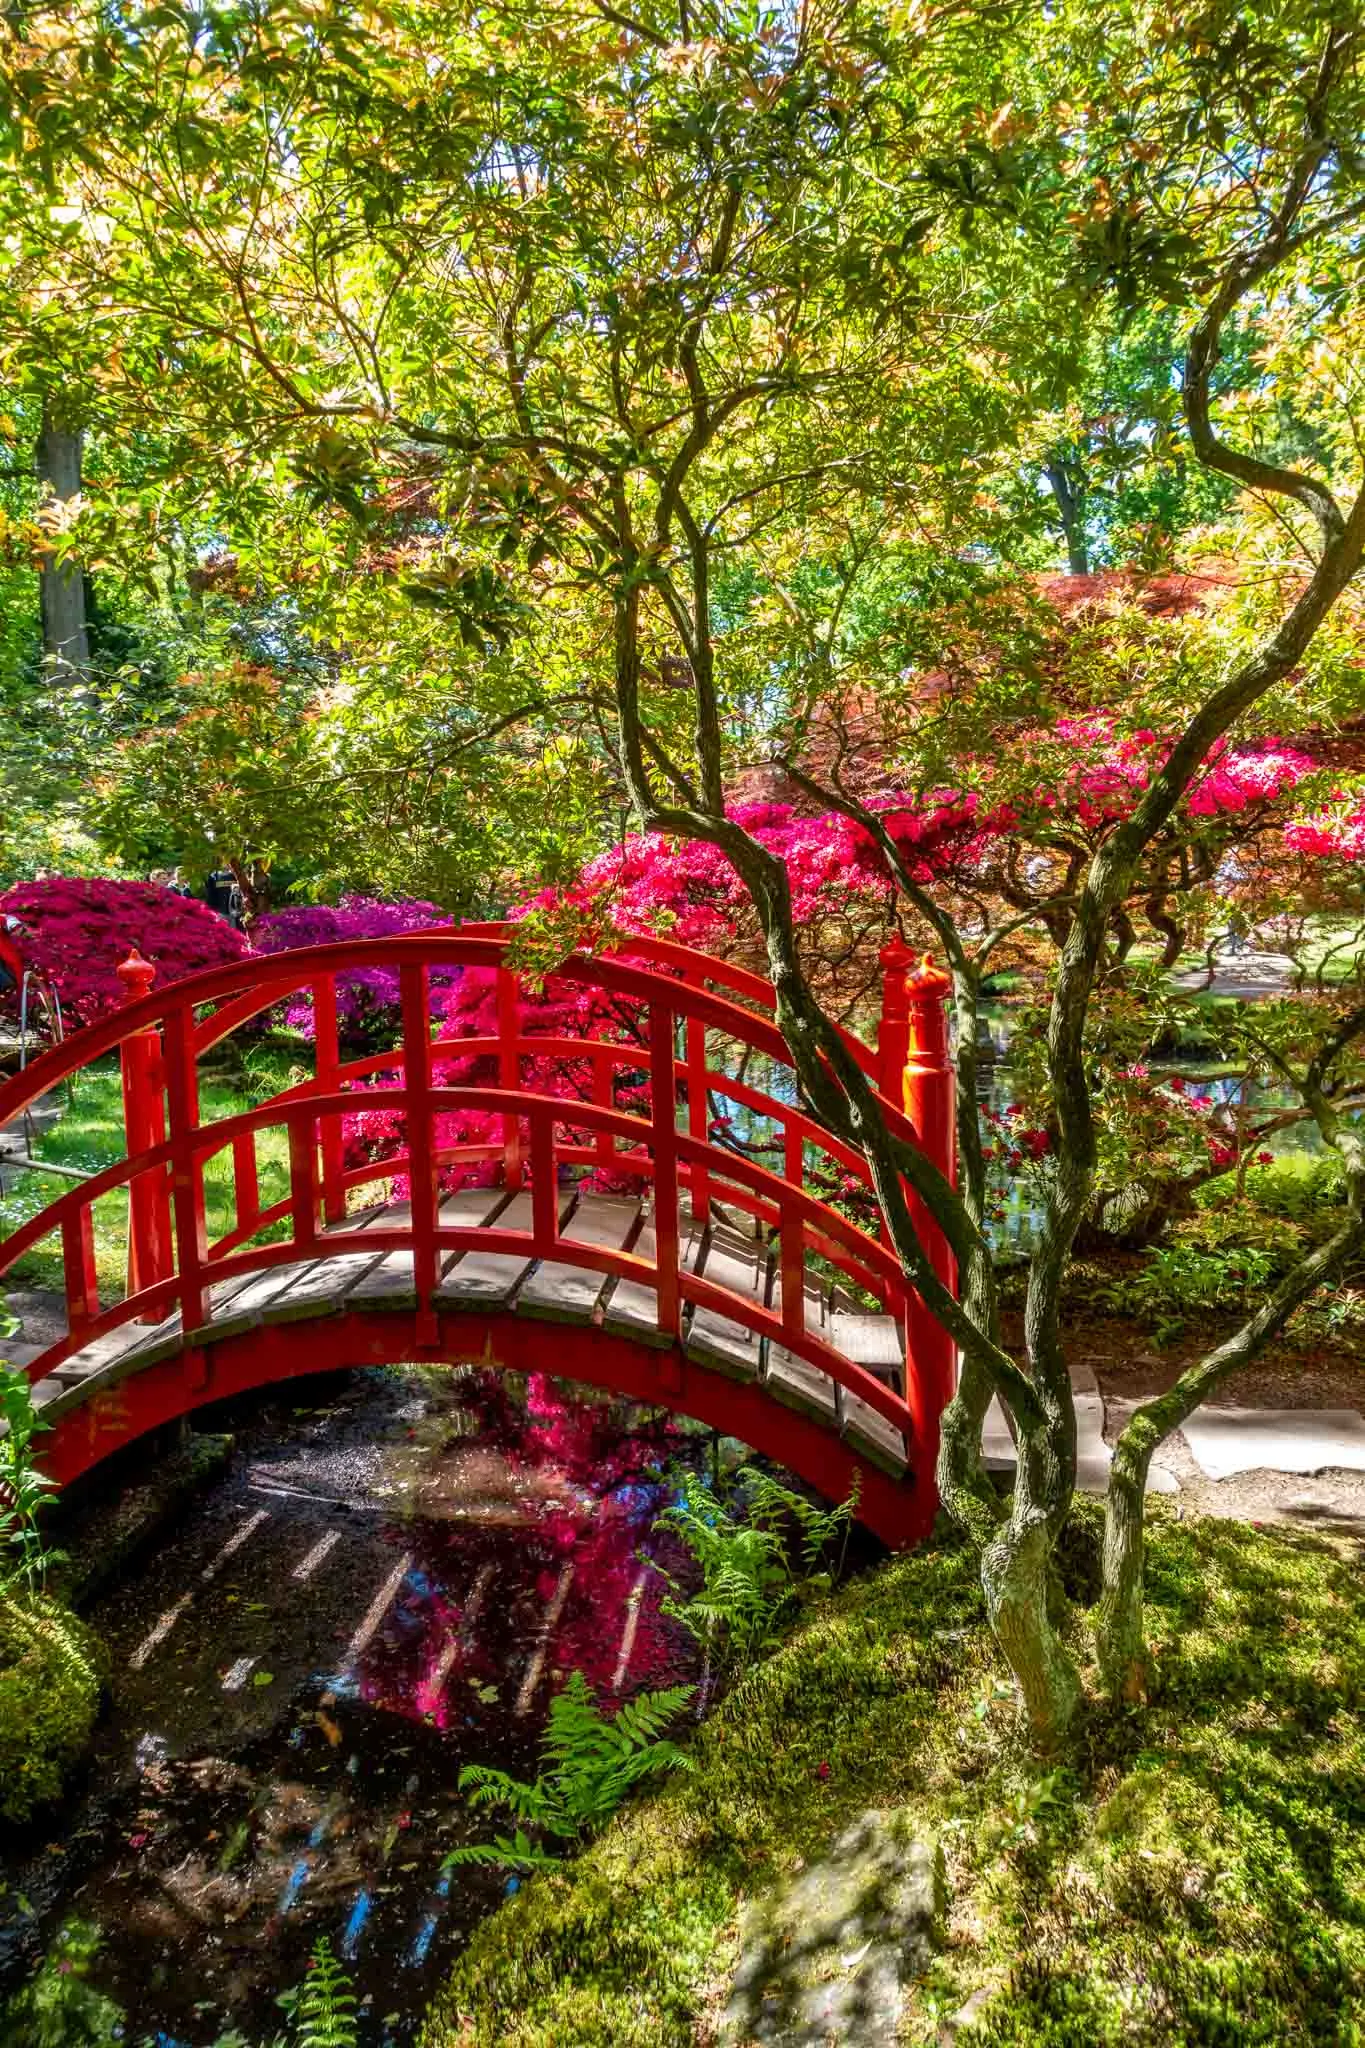 Red wooden bridge over a stream surrounded by trees and flowers.